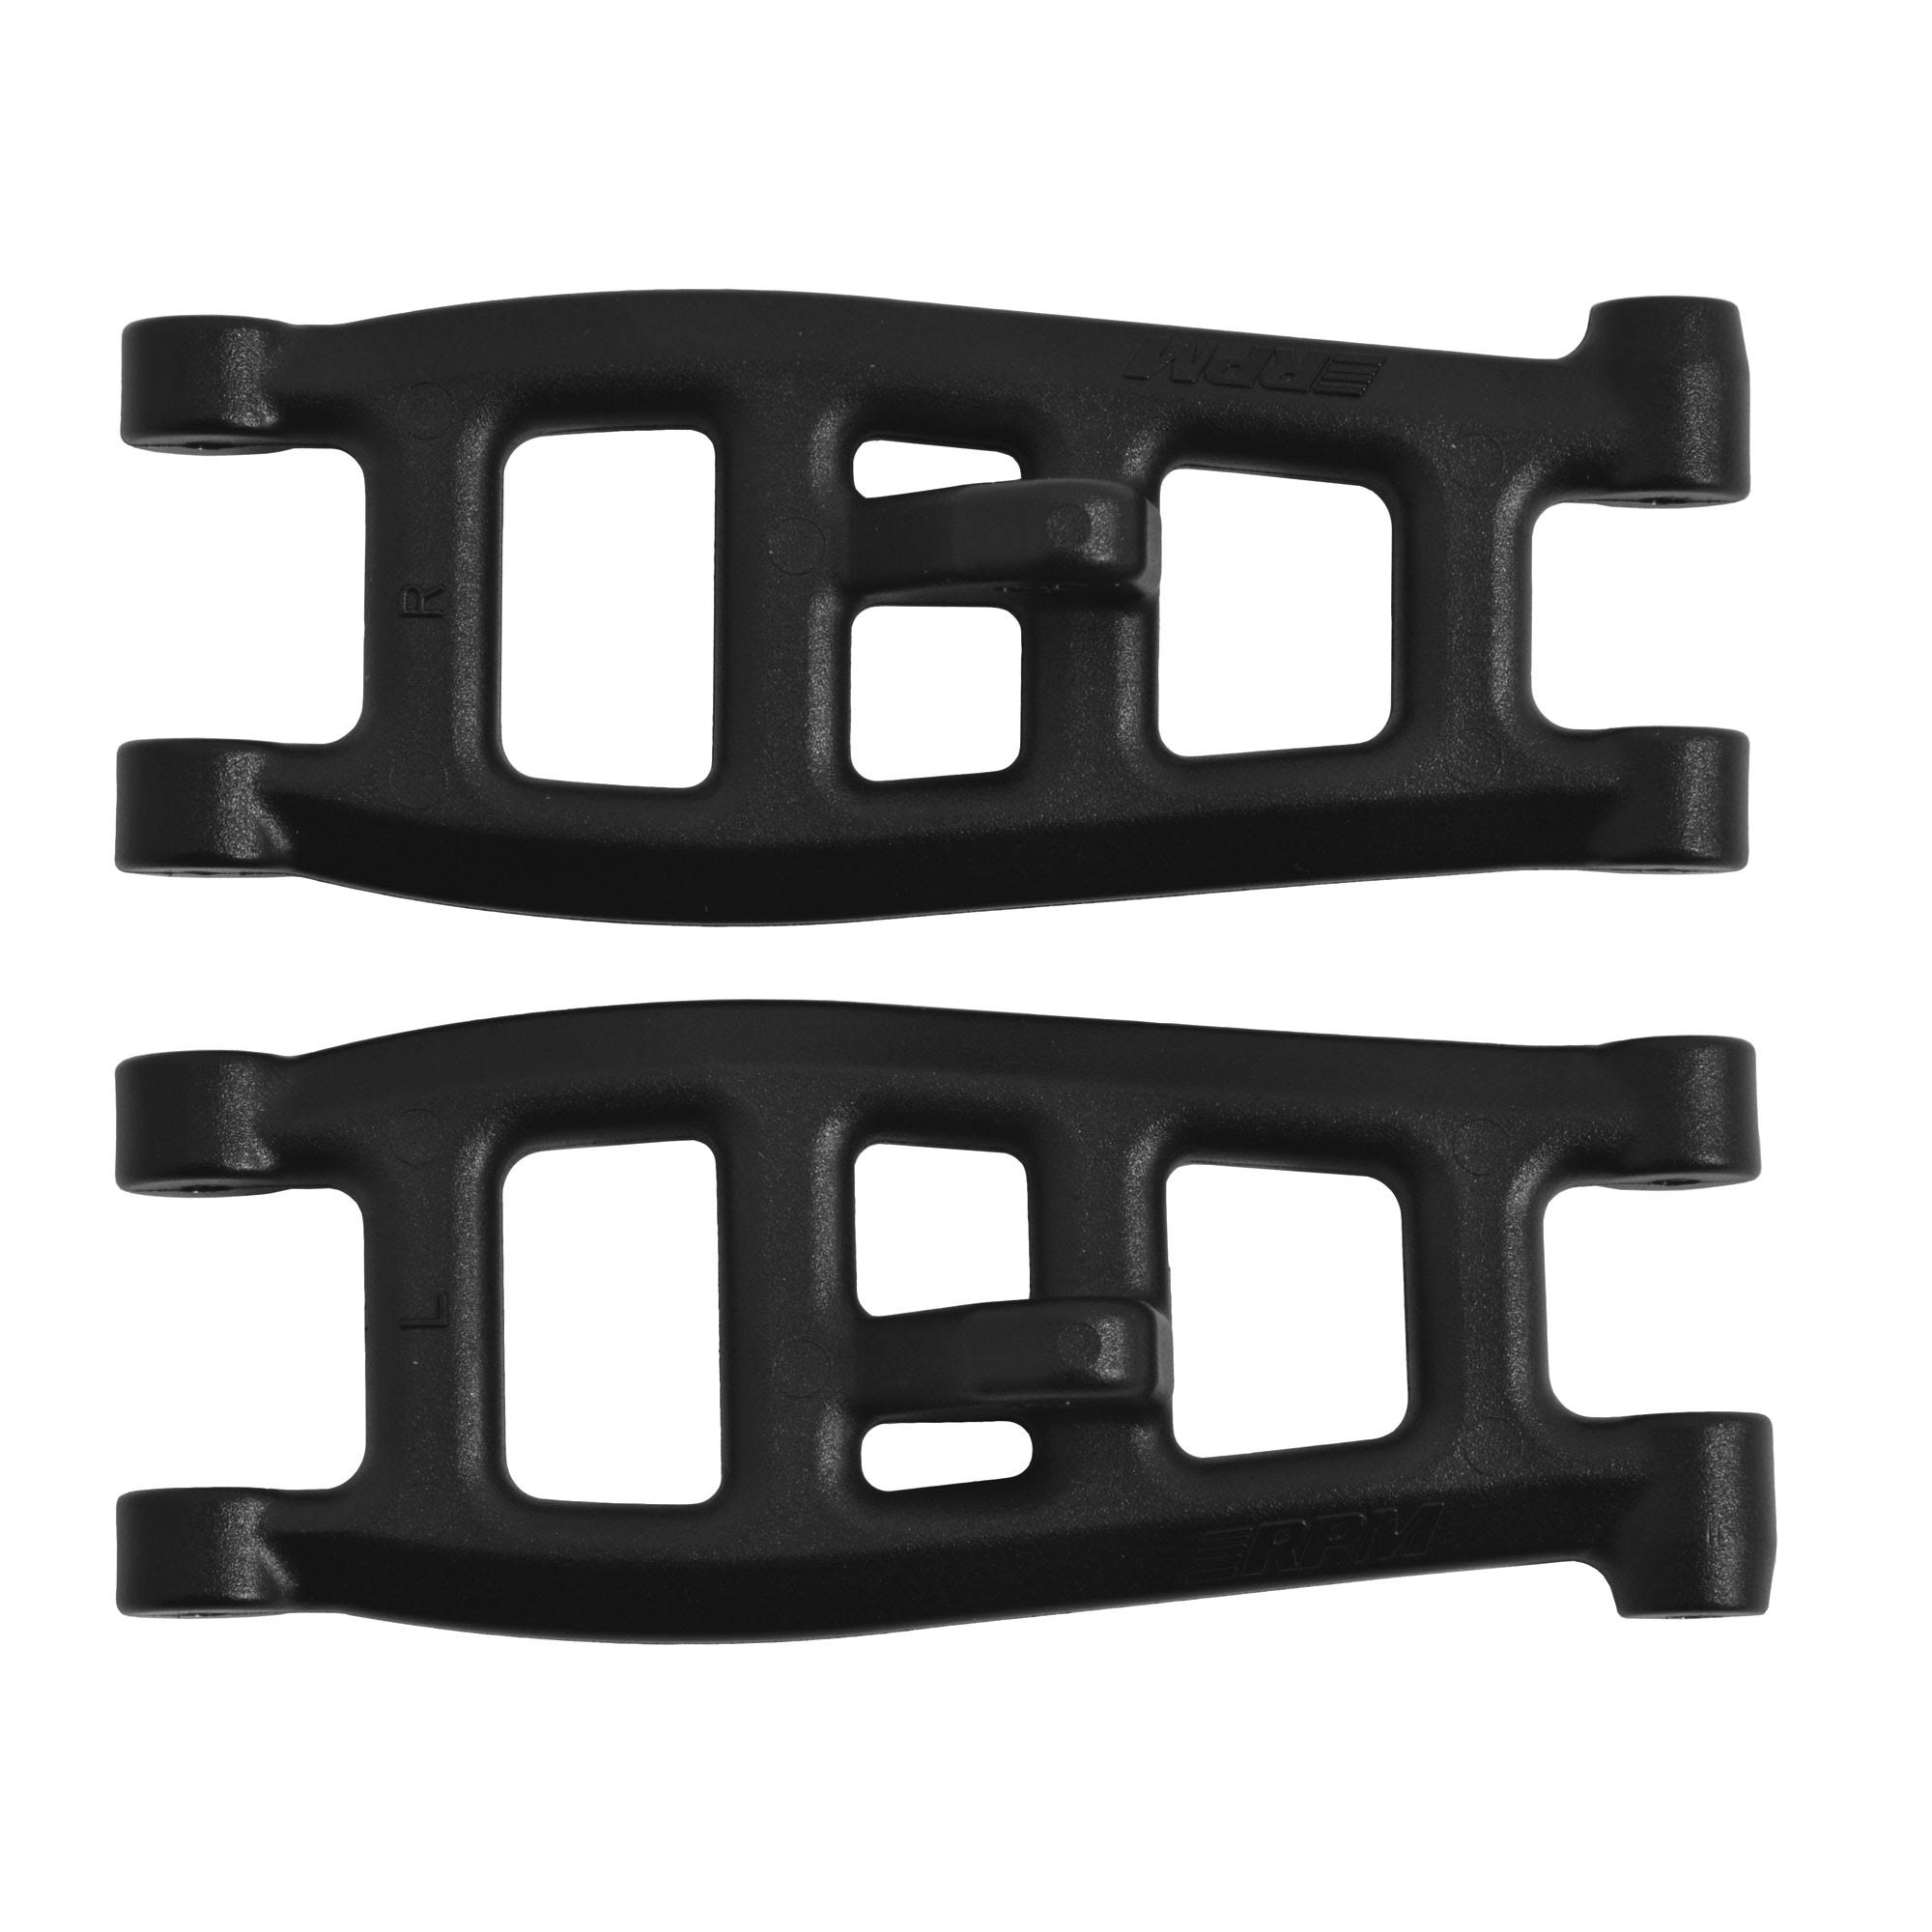 RPM 70582 ECX Torment 2wd, Ruckus 2WD and Circuit 2WD Front A-arms, Black